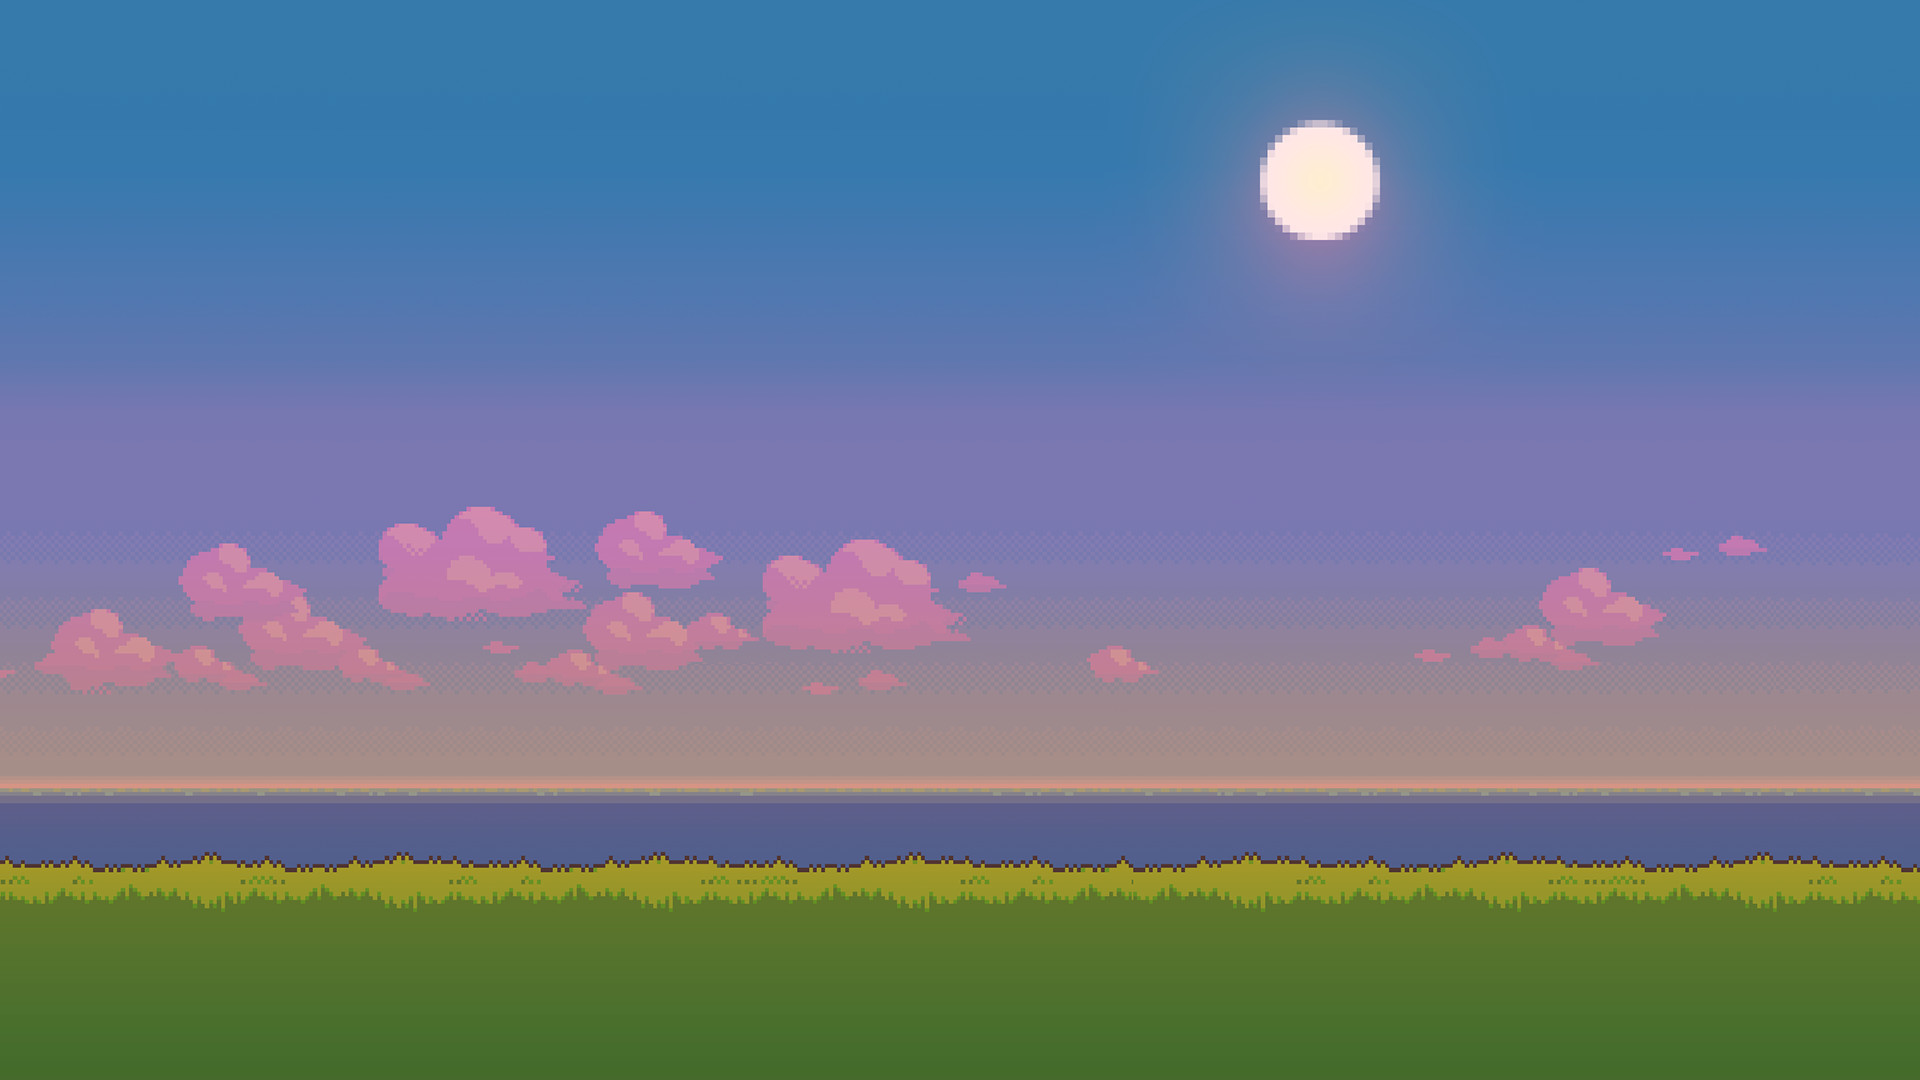 New Version Of The 8bit Day - Pixel Art Background - HD Wallpaper 